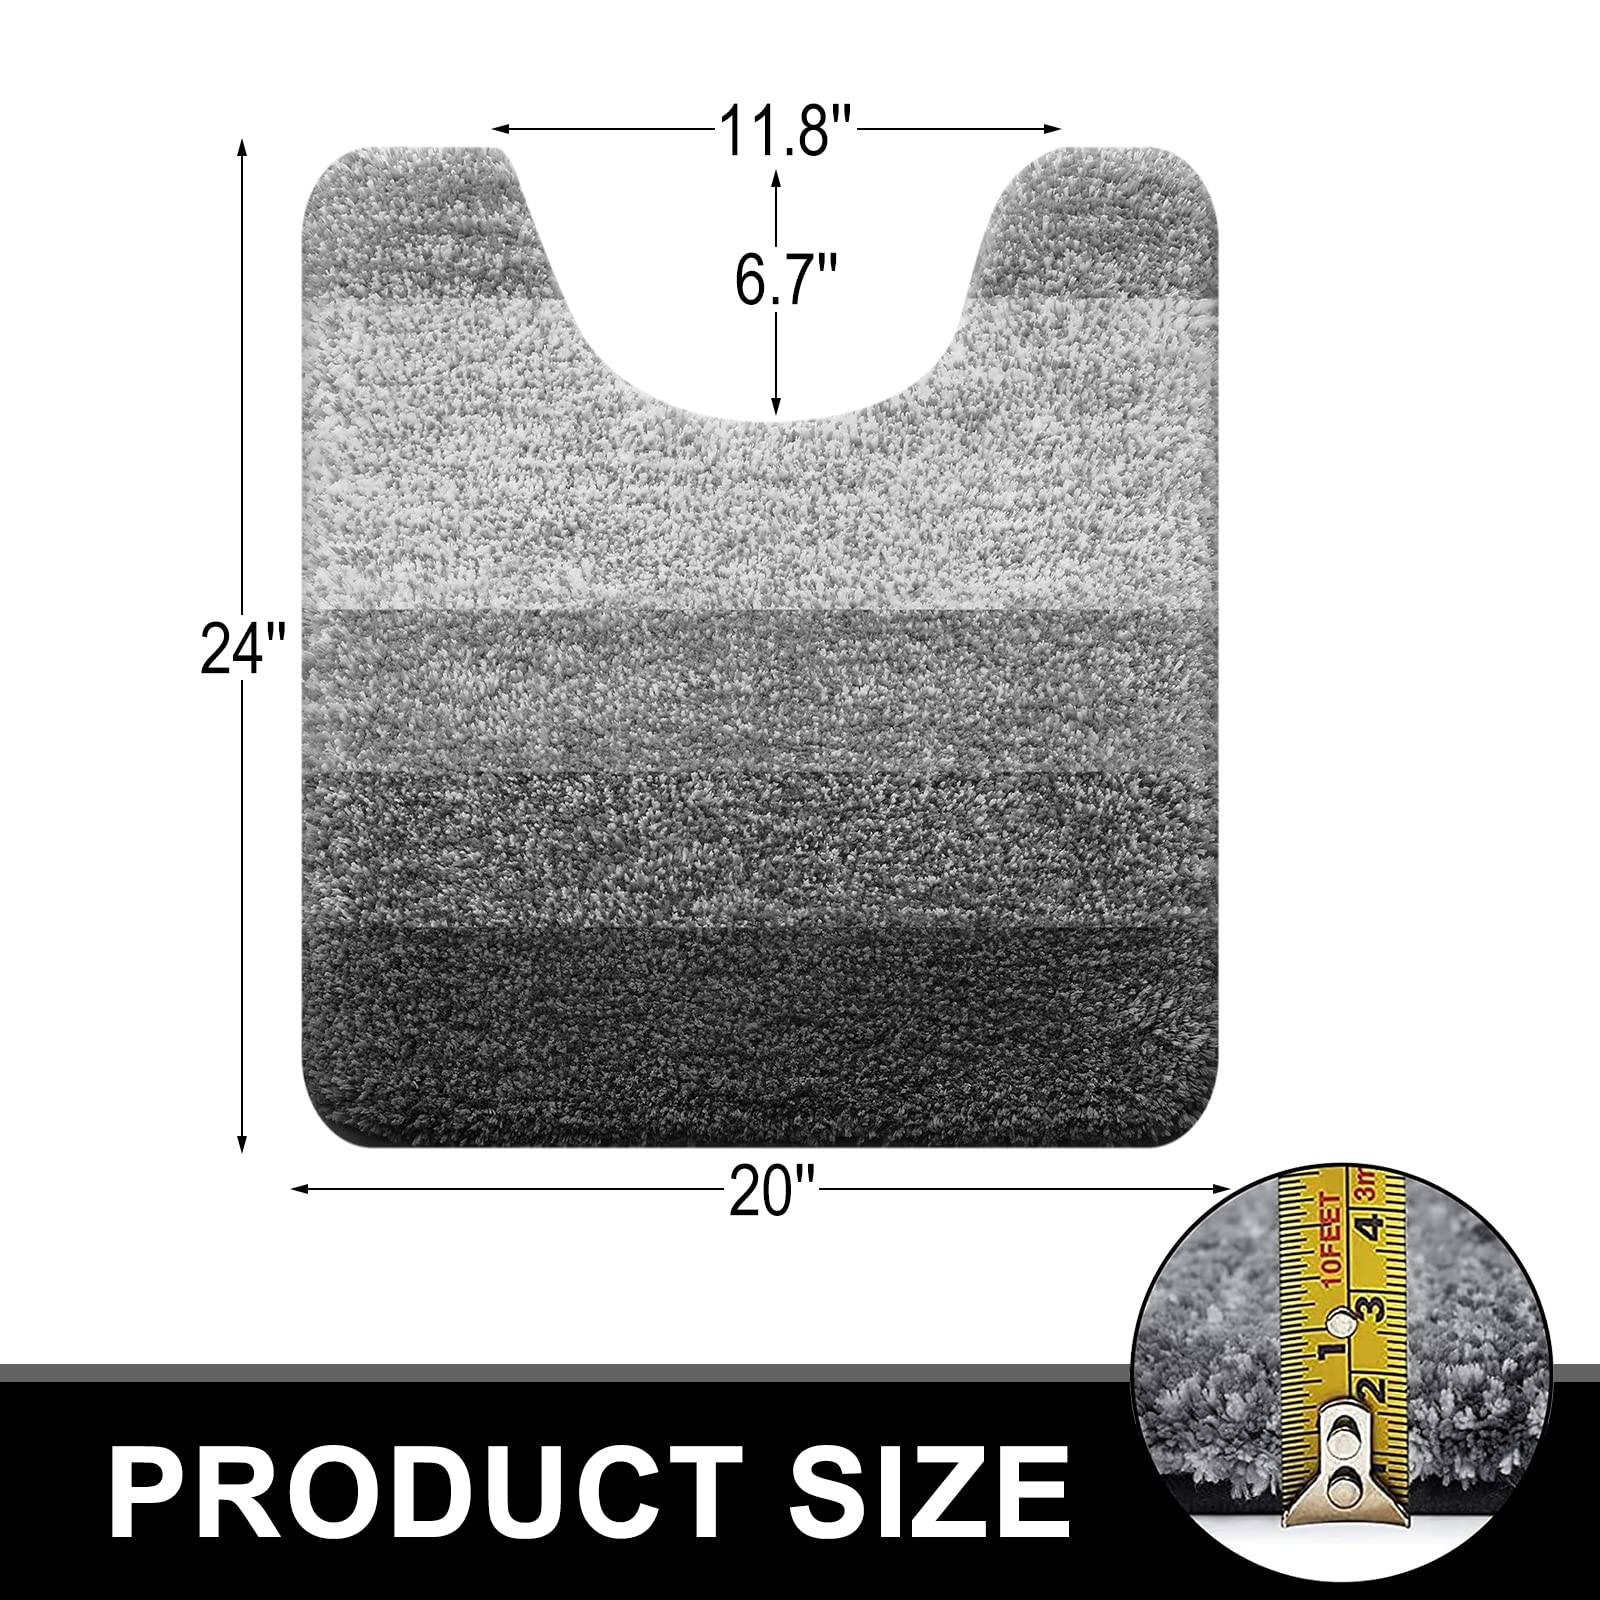 Buganda Luxury U-Shaped Bathroom Rugs, Super Soft and Absorbent Microfiber Toilet Bath Mats, Non-Slip Contour Bathroom Carpets with Rubber Backing, 20X24, Grey - image 2 of 7